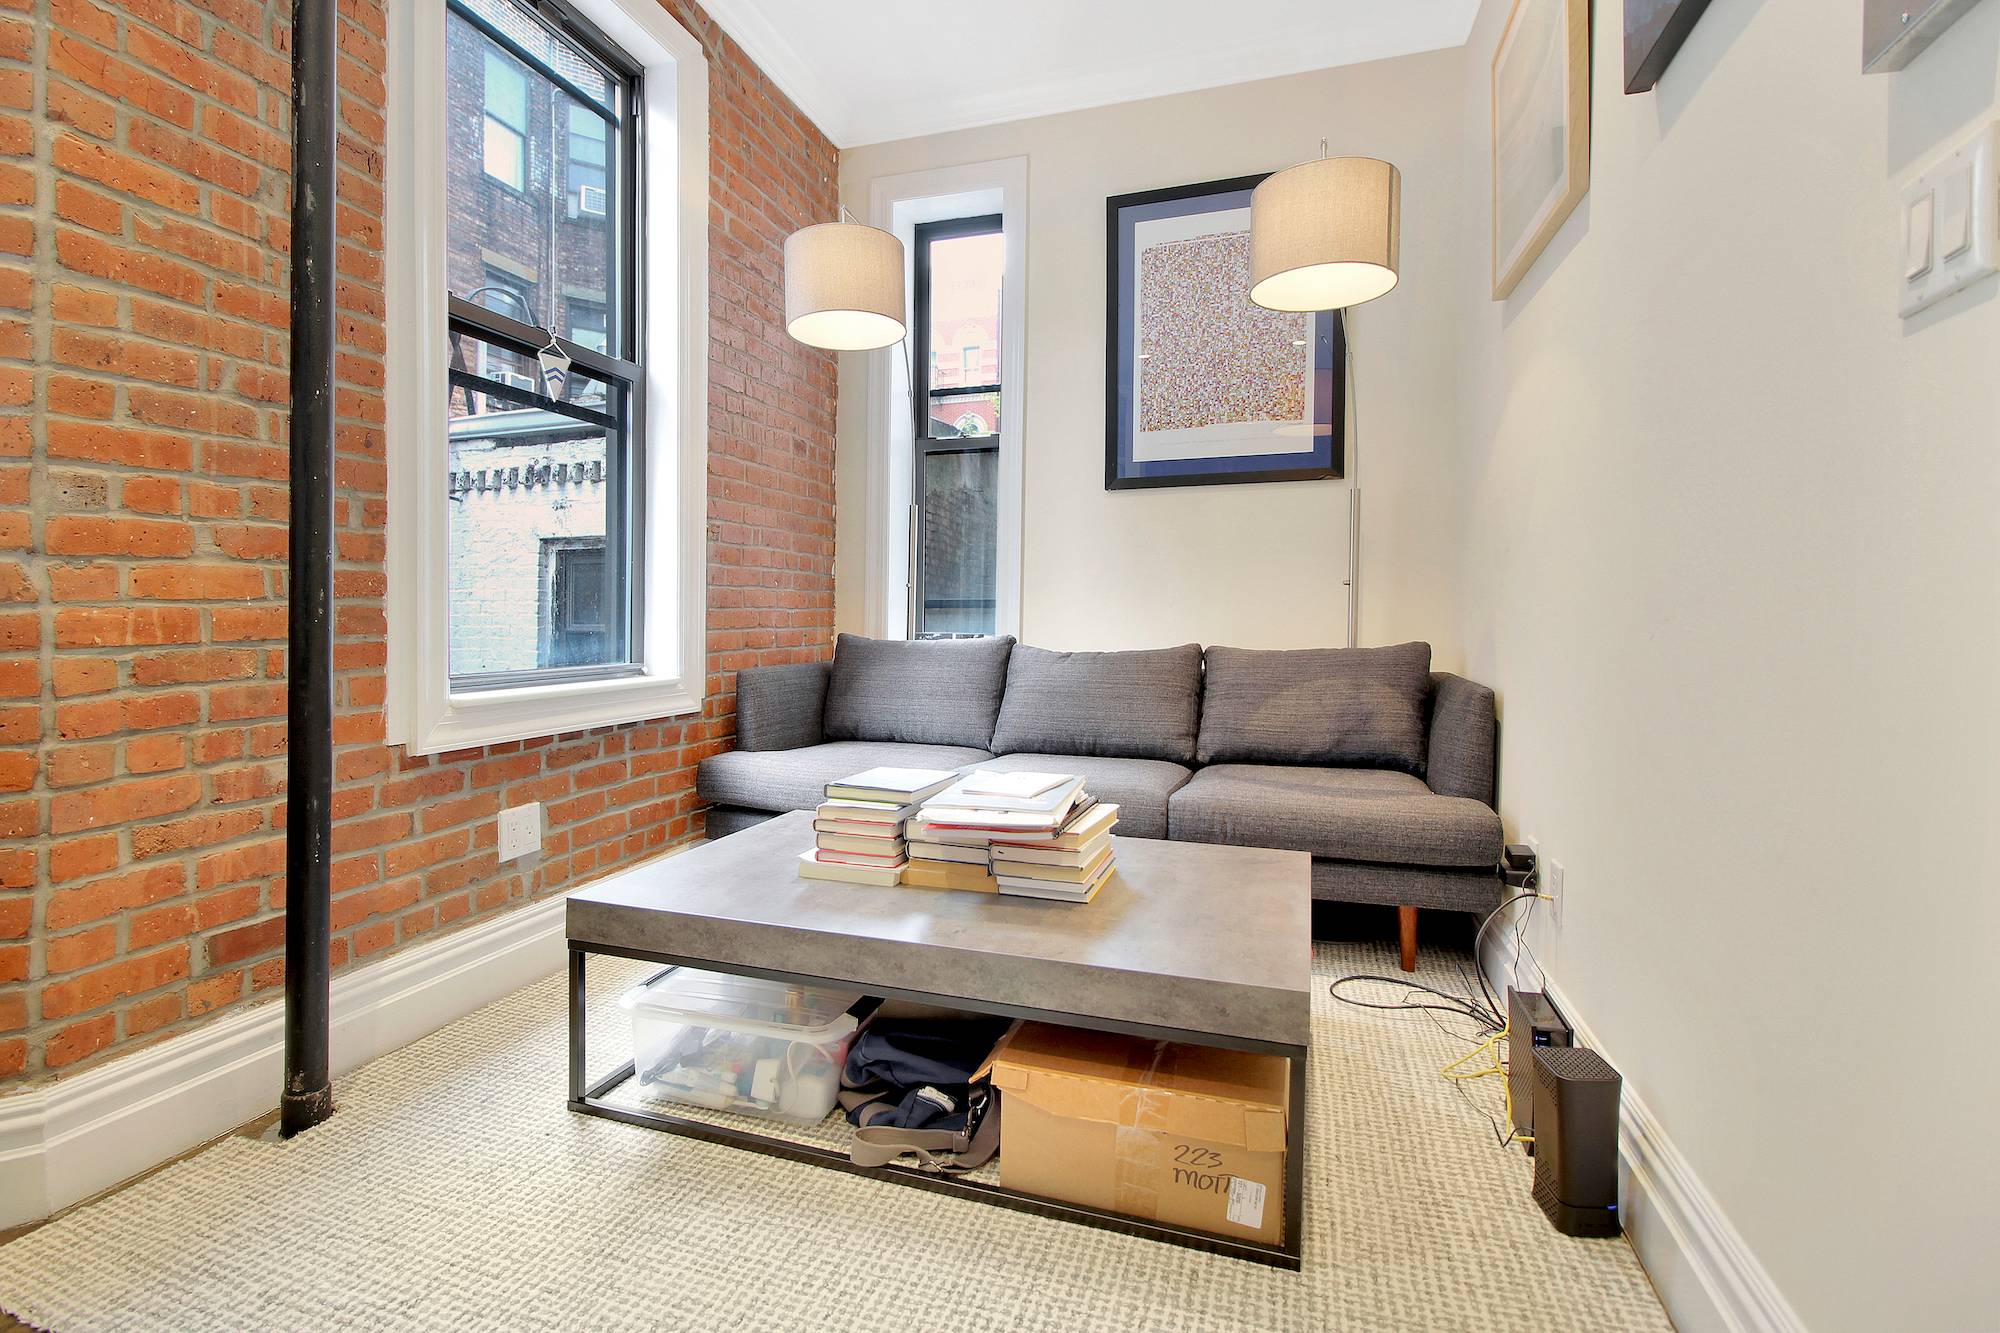 No Broker Fee ! Renovated 1 Bedroom with In Unit Laundry in the Heart of SoHo !